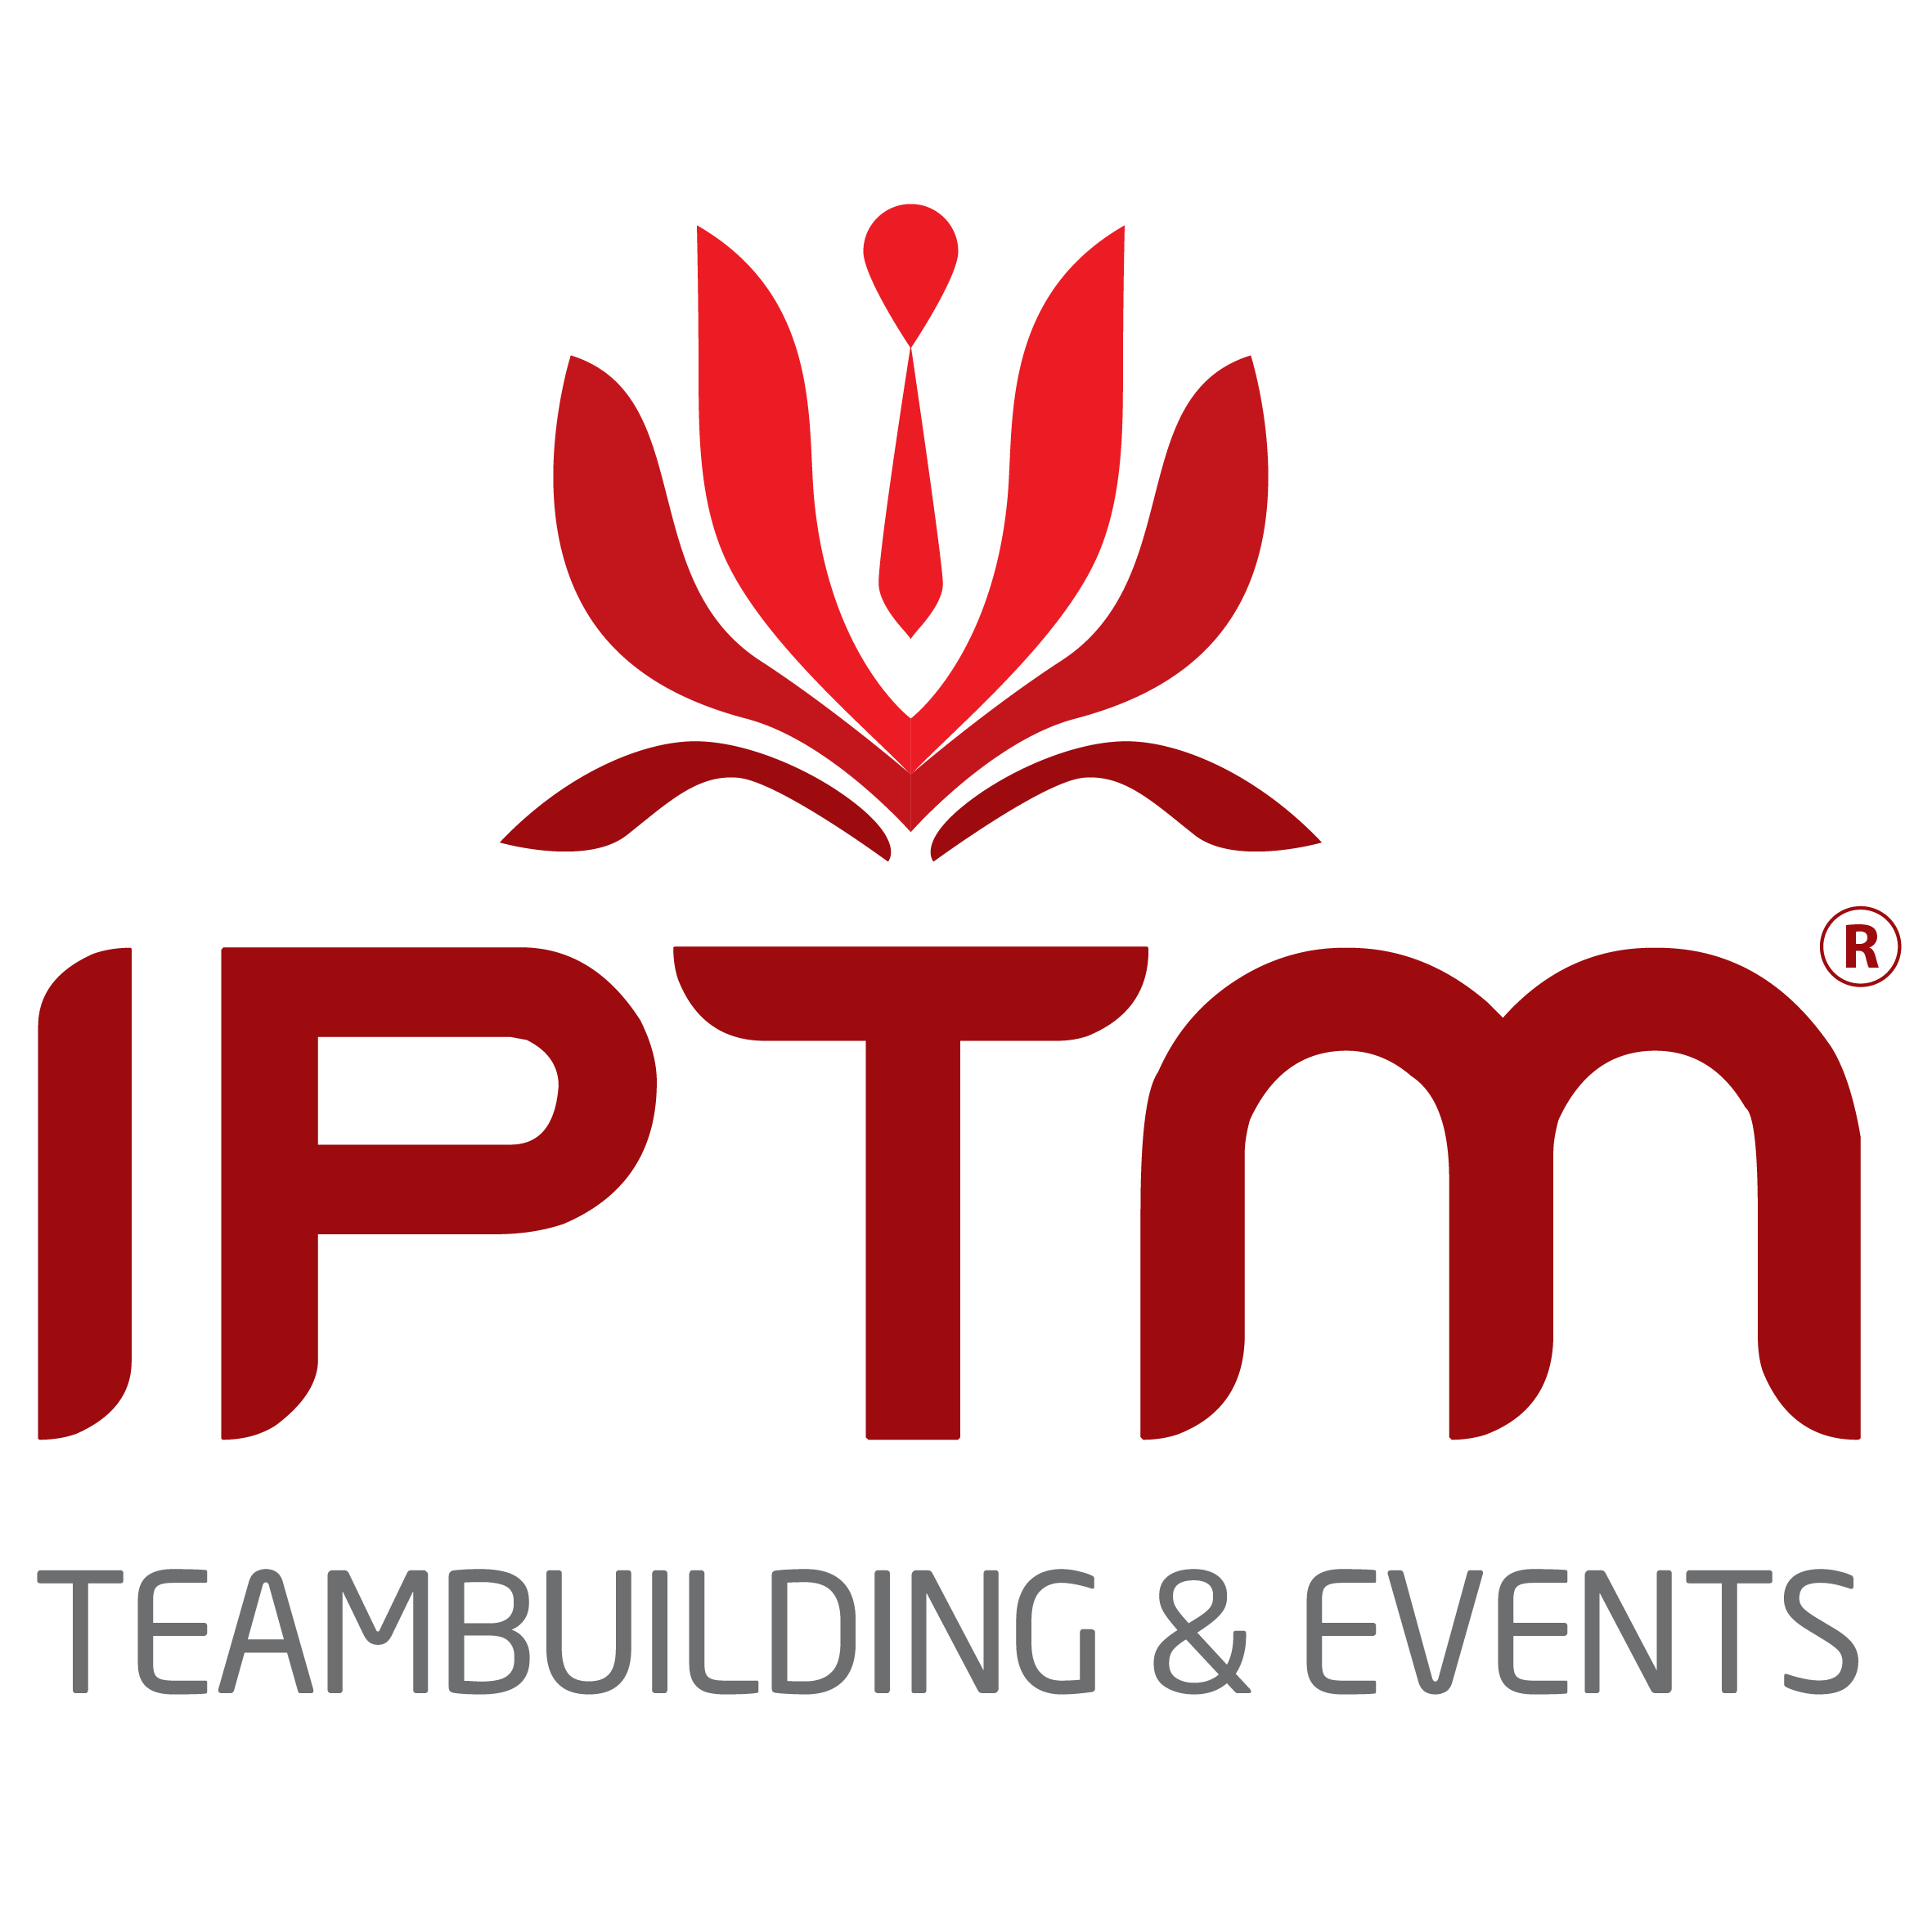 IPTM Event Management in Vietnam, teambuilding, conference, themed party, family day, annual celebration, lauching